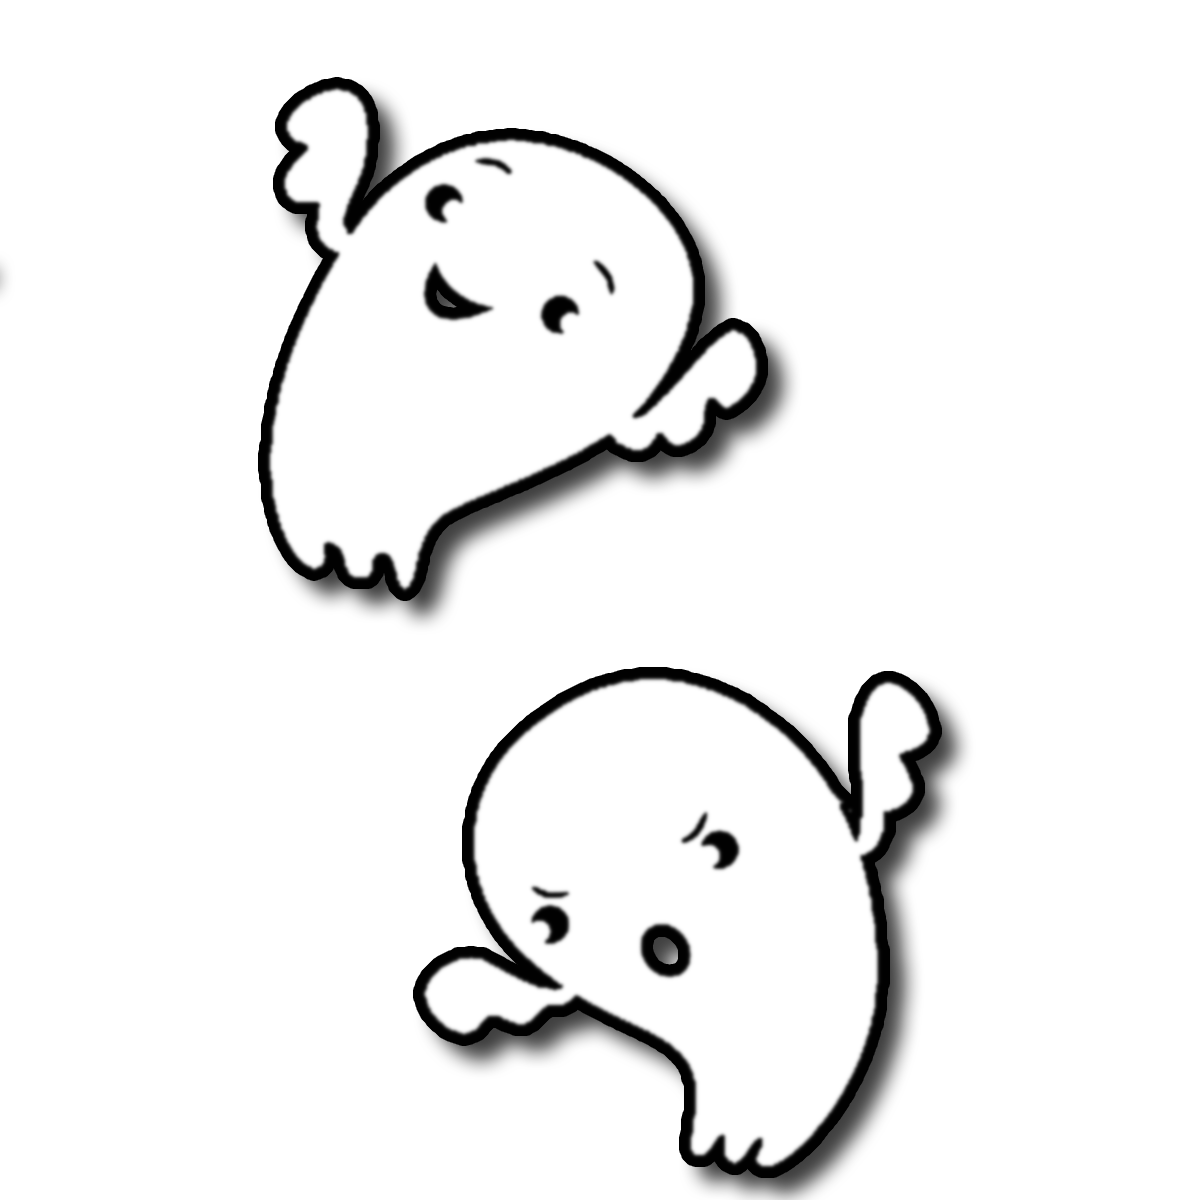 clipart ghost images - photo #28